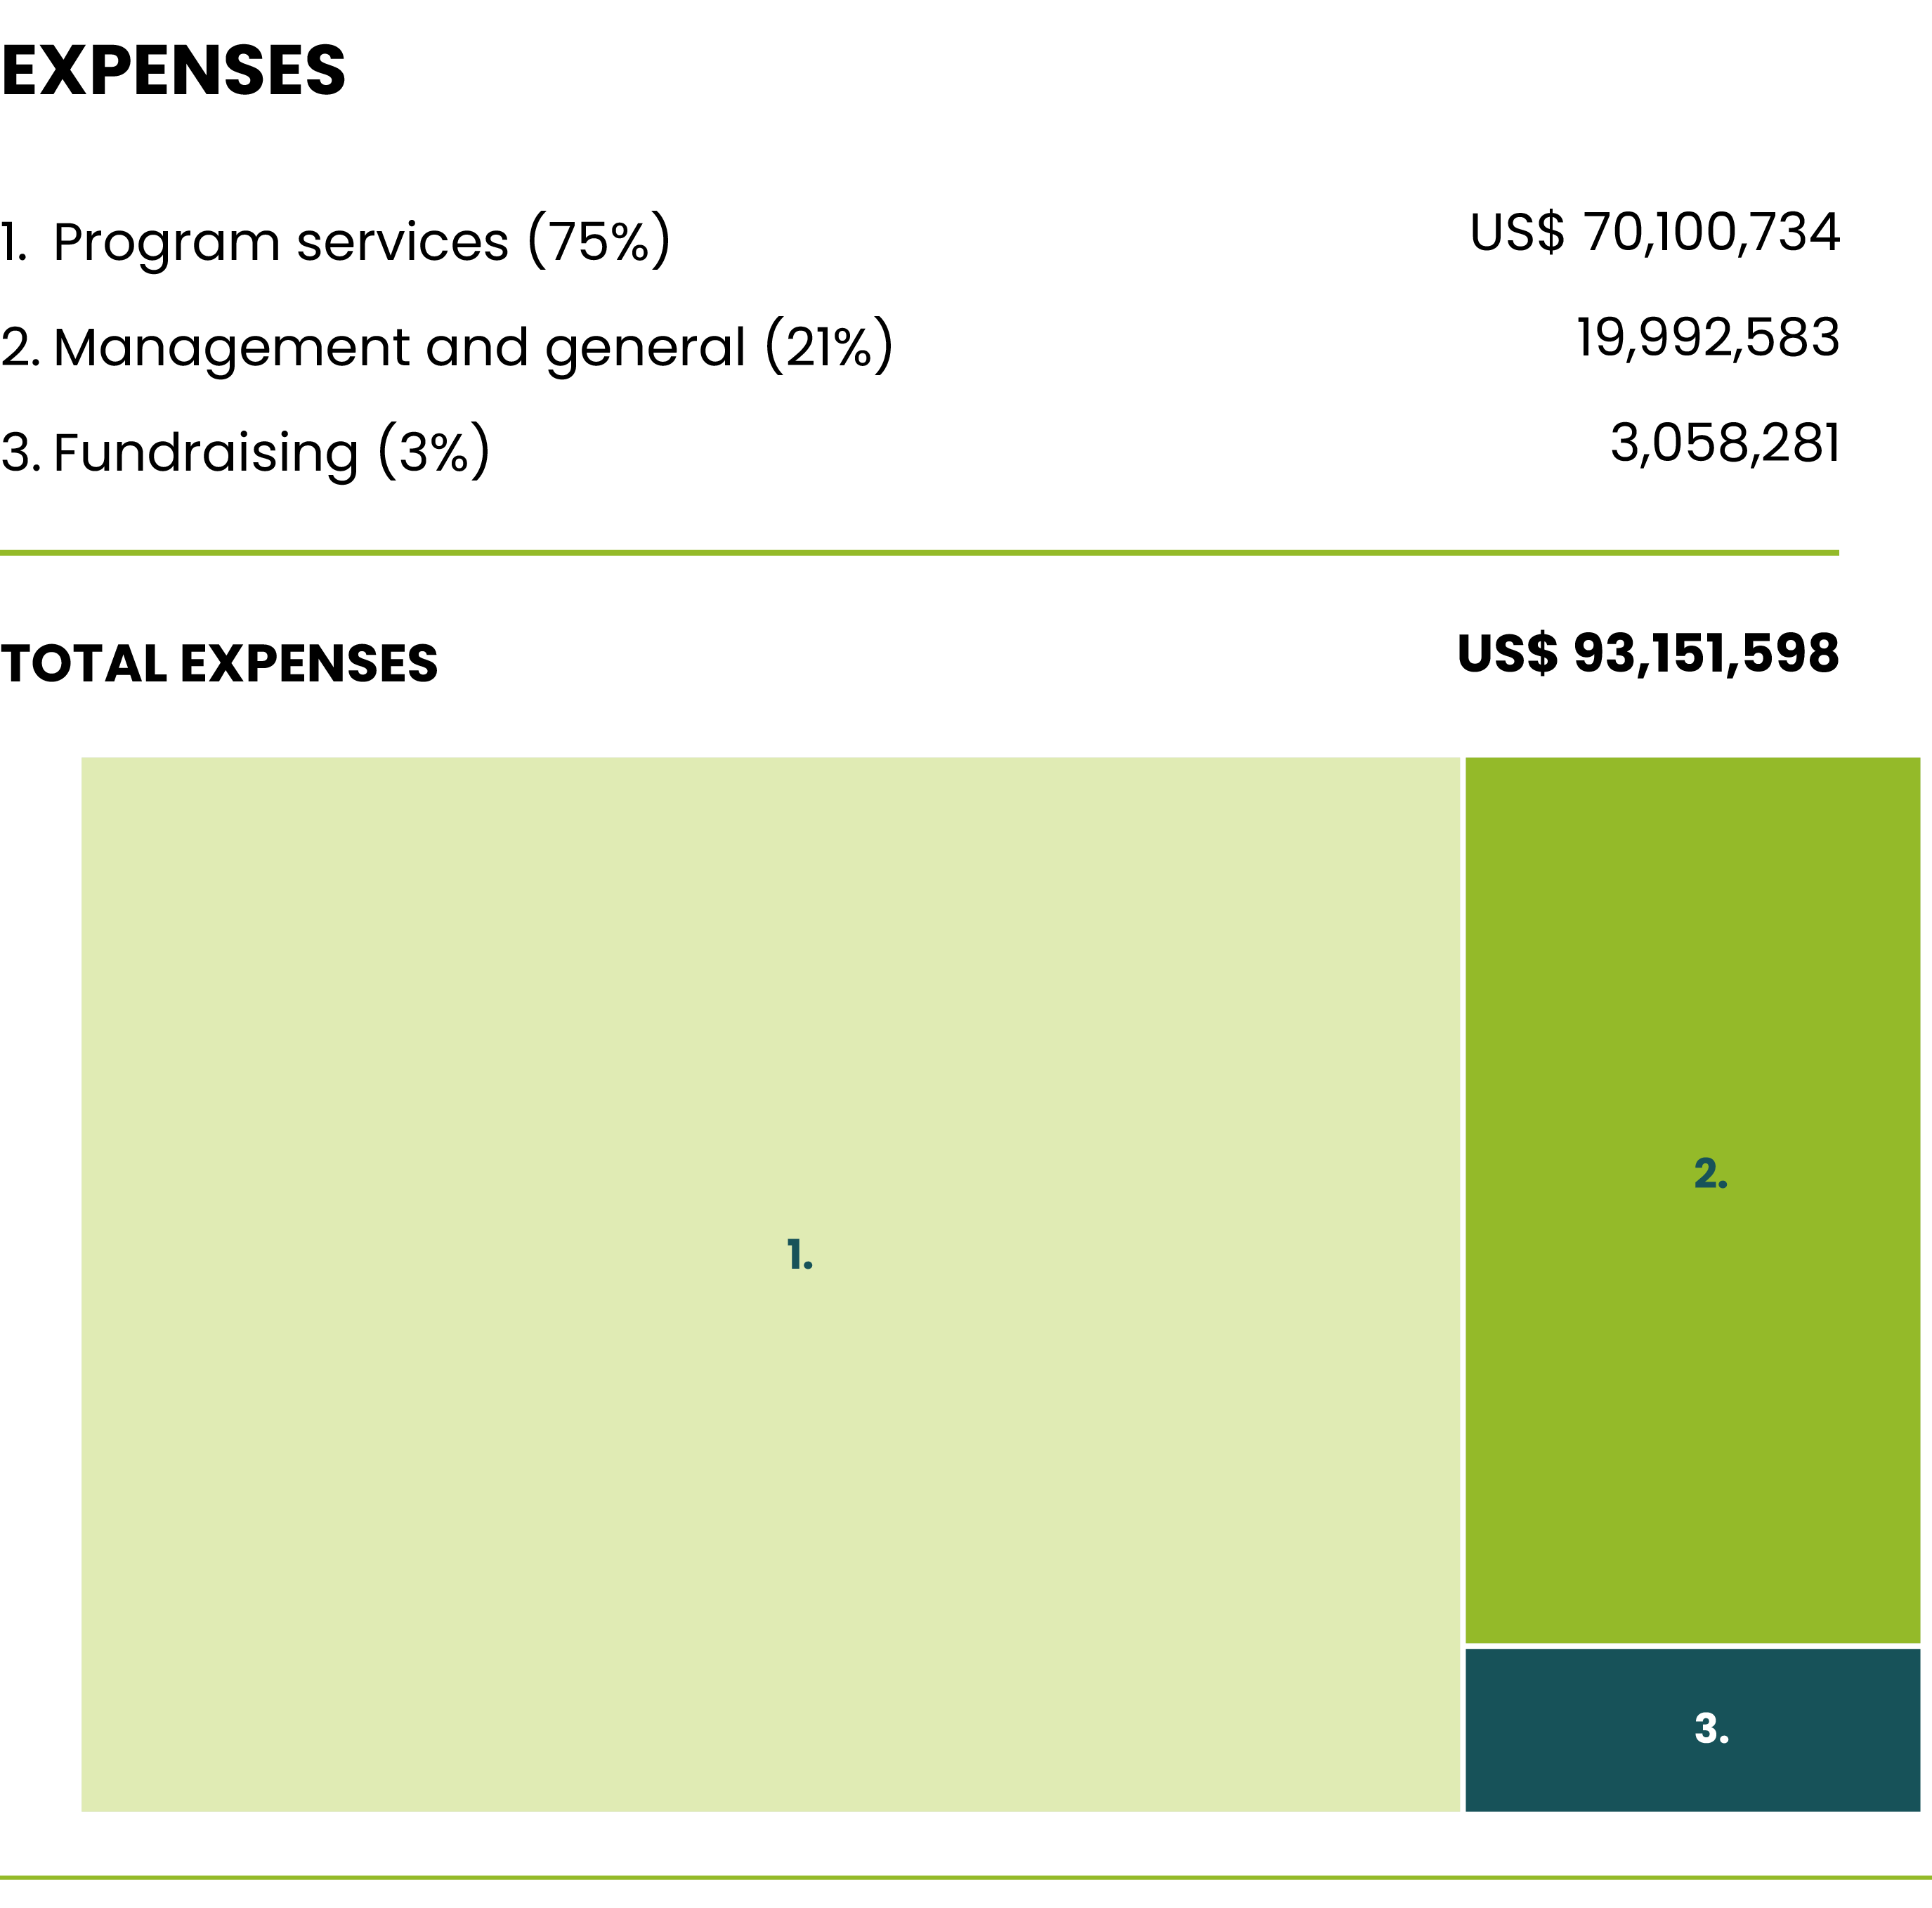 EXPENSES
1. Program services (75%) US$
70,100,734
2. Management and general (21%) 19,992,583
3. Fundraising (3%) 3,058,281
TOTAL EXPENSES US$ 93,151,598
